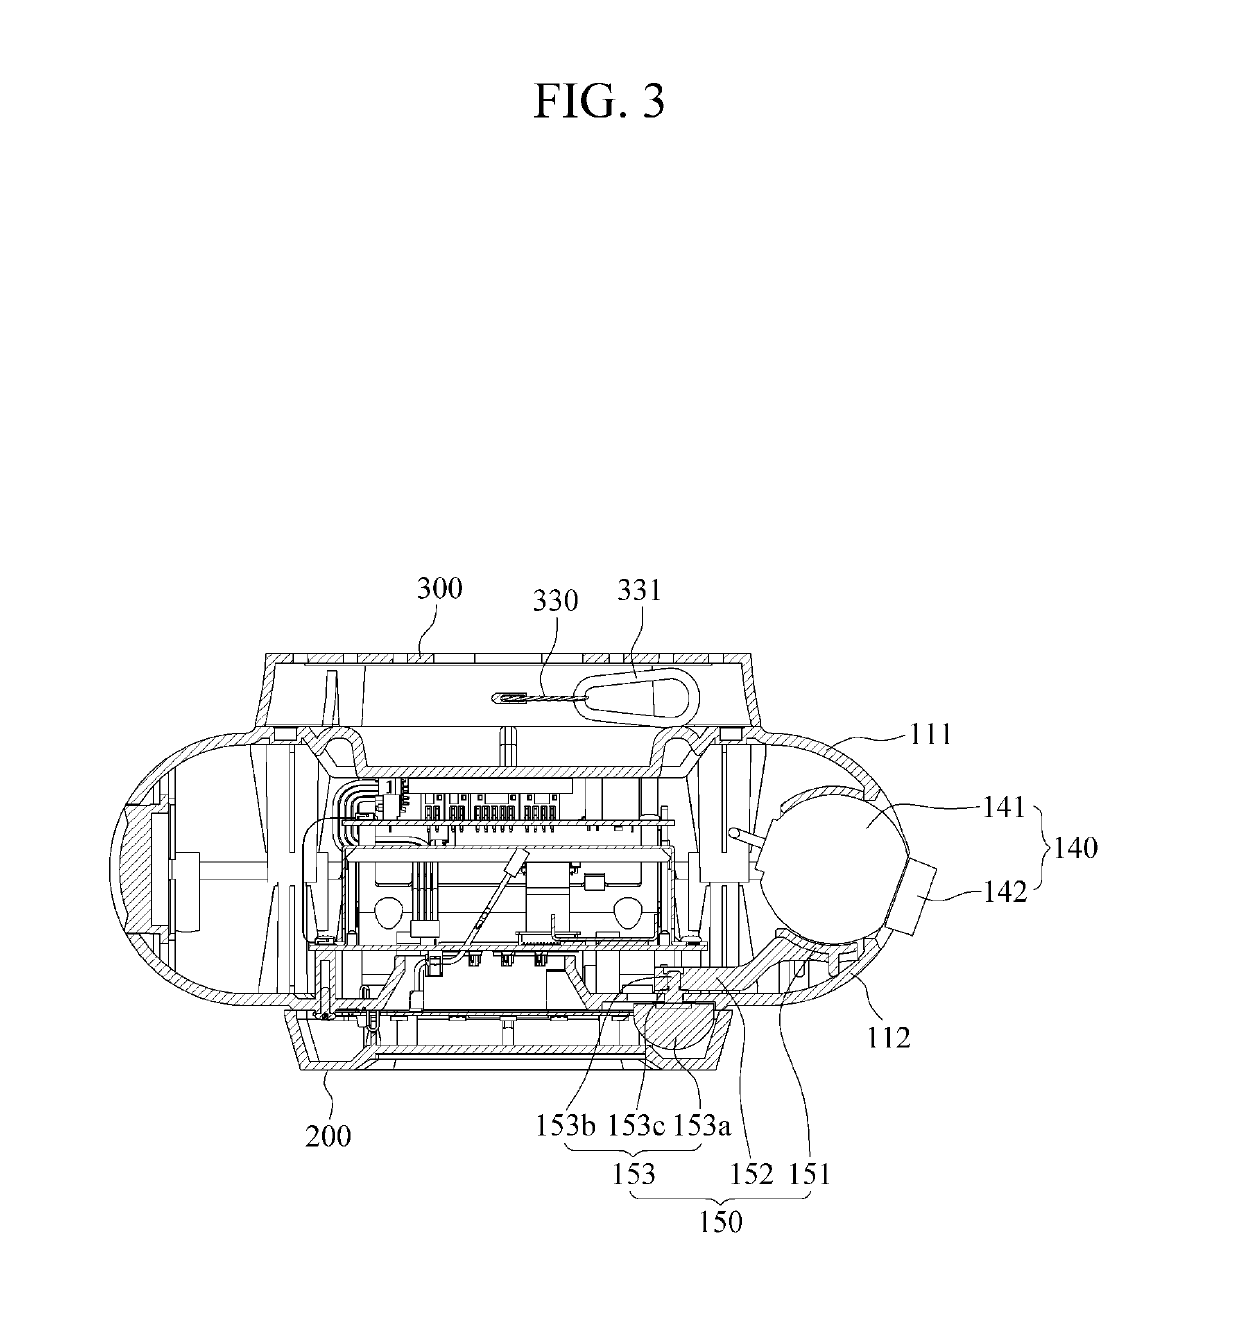 Parking guidance camera apparatus and method of installing the same